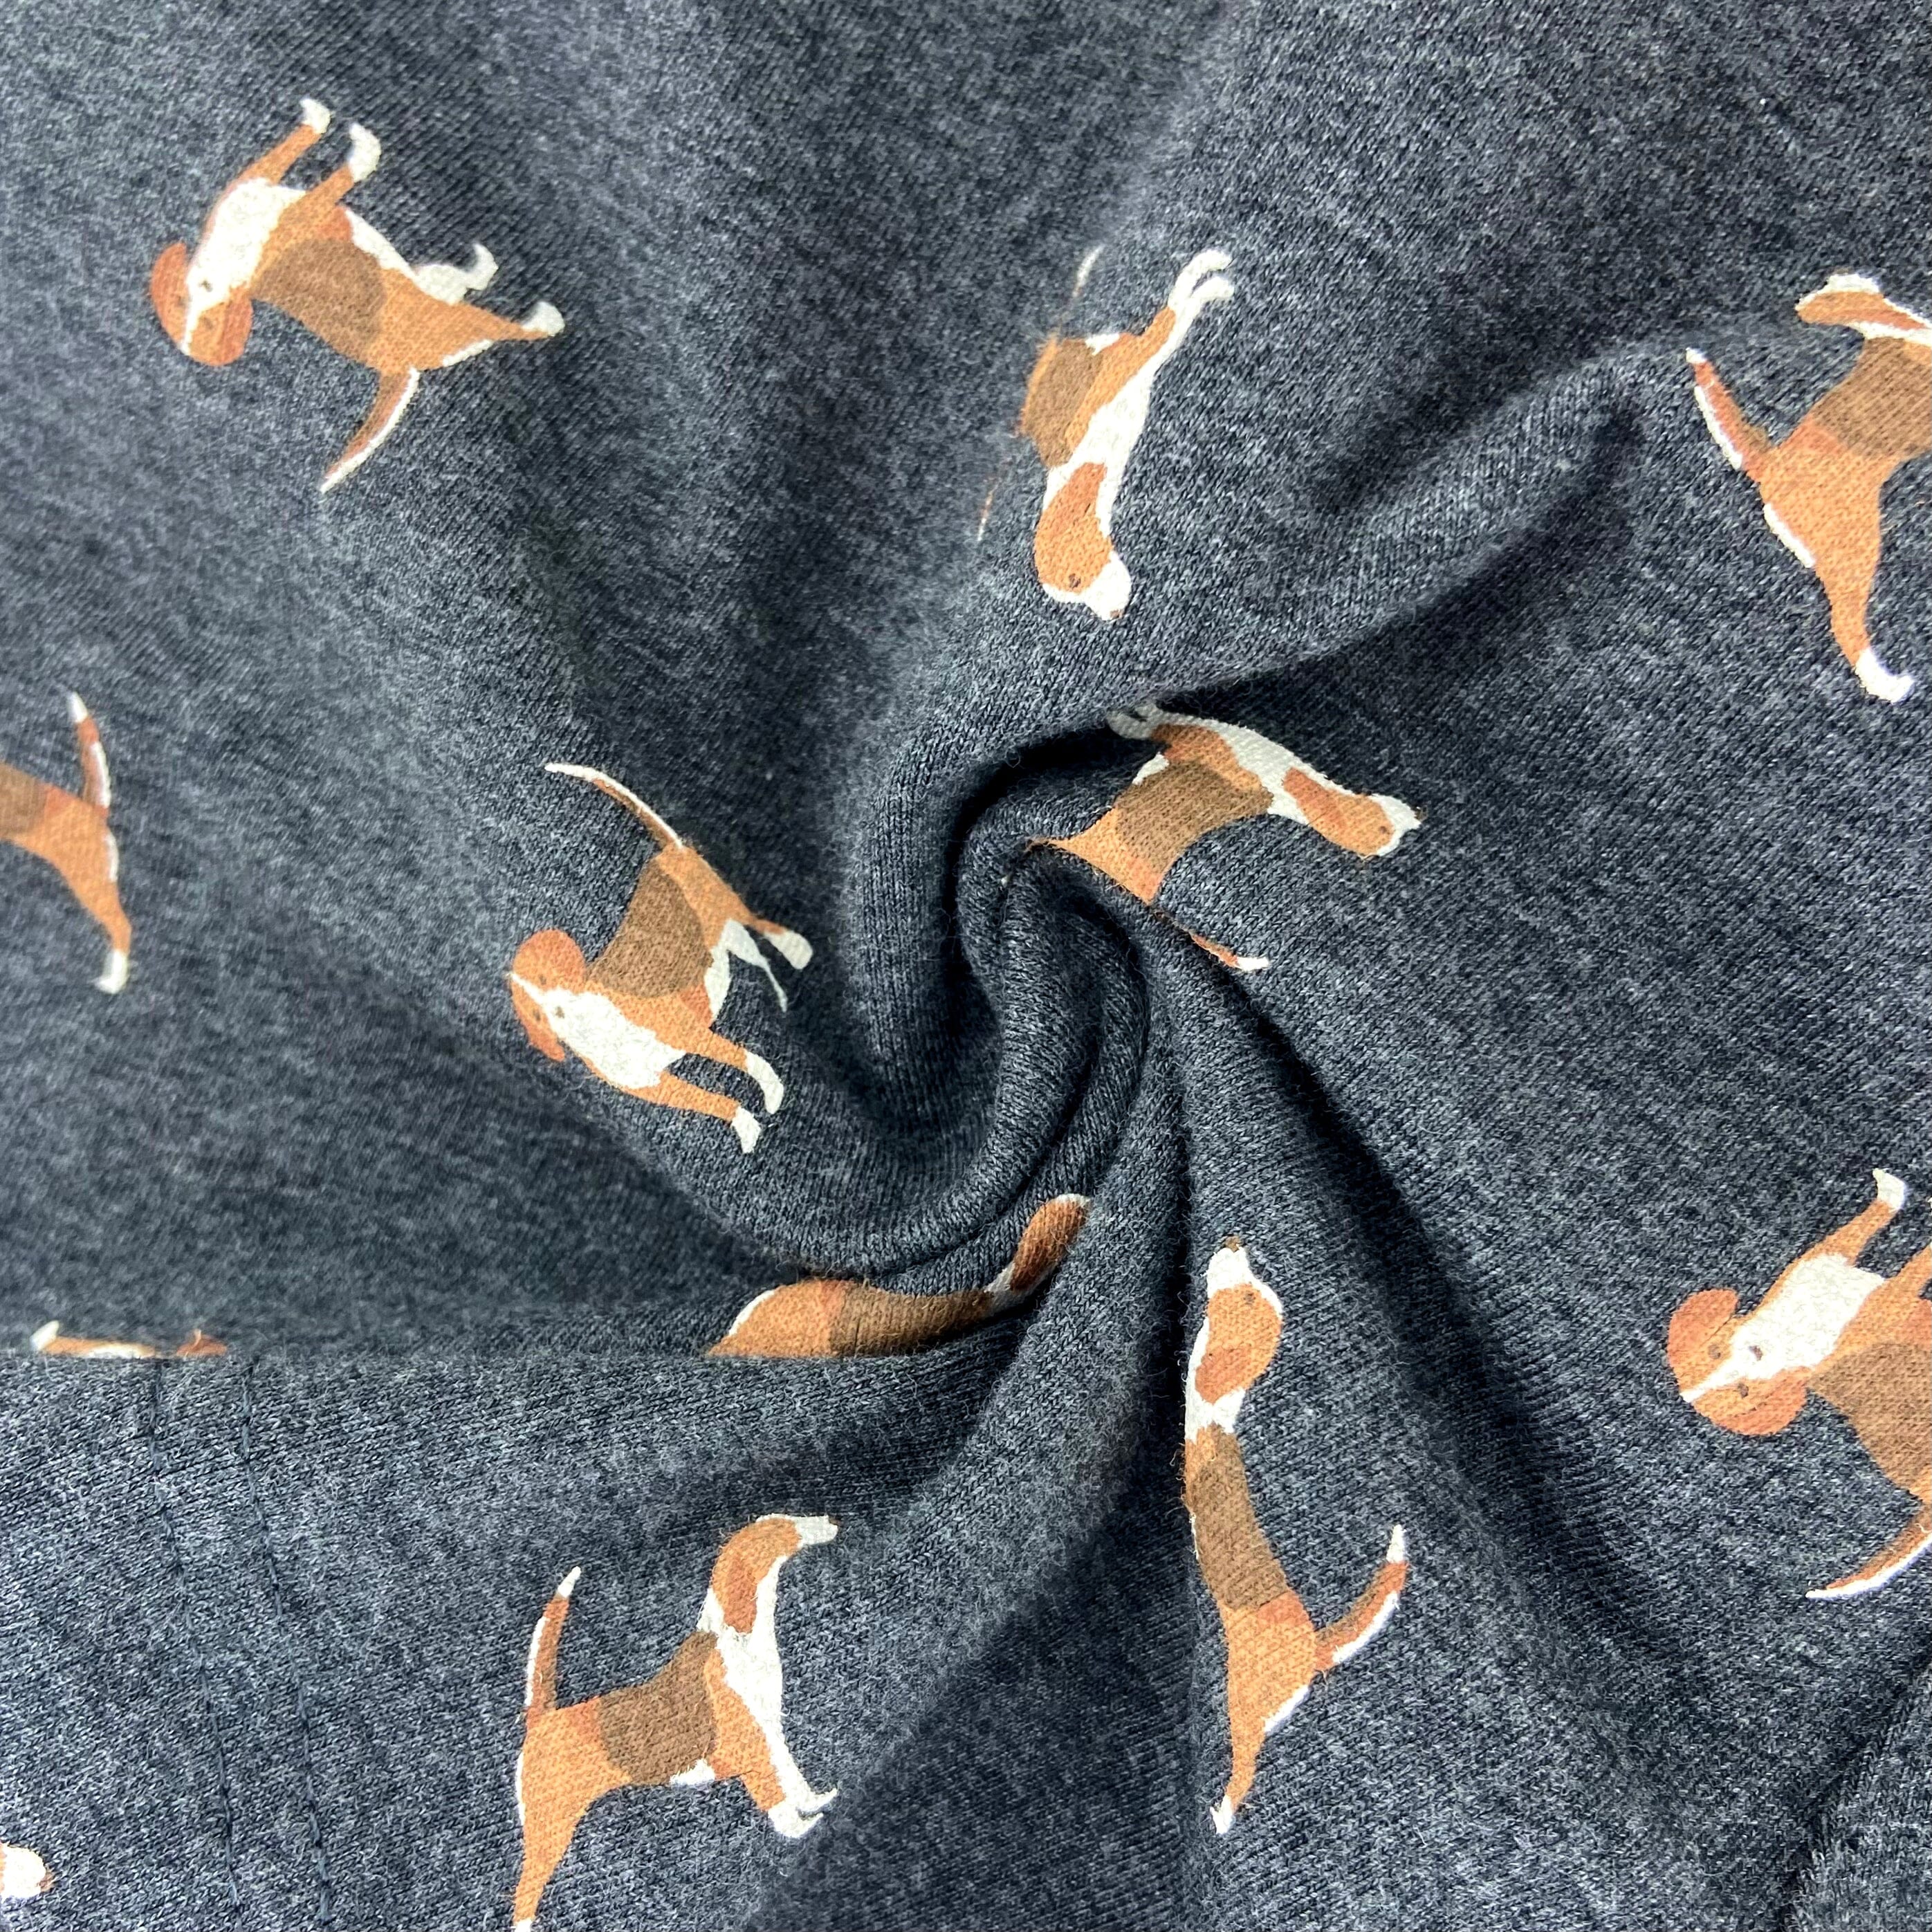 Men's Beagle Puppy Dog All Over Print Knit Boxer Pajama Shorts in Grey